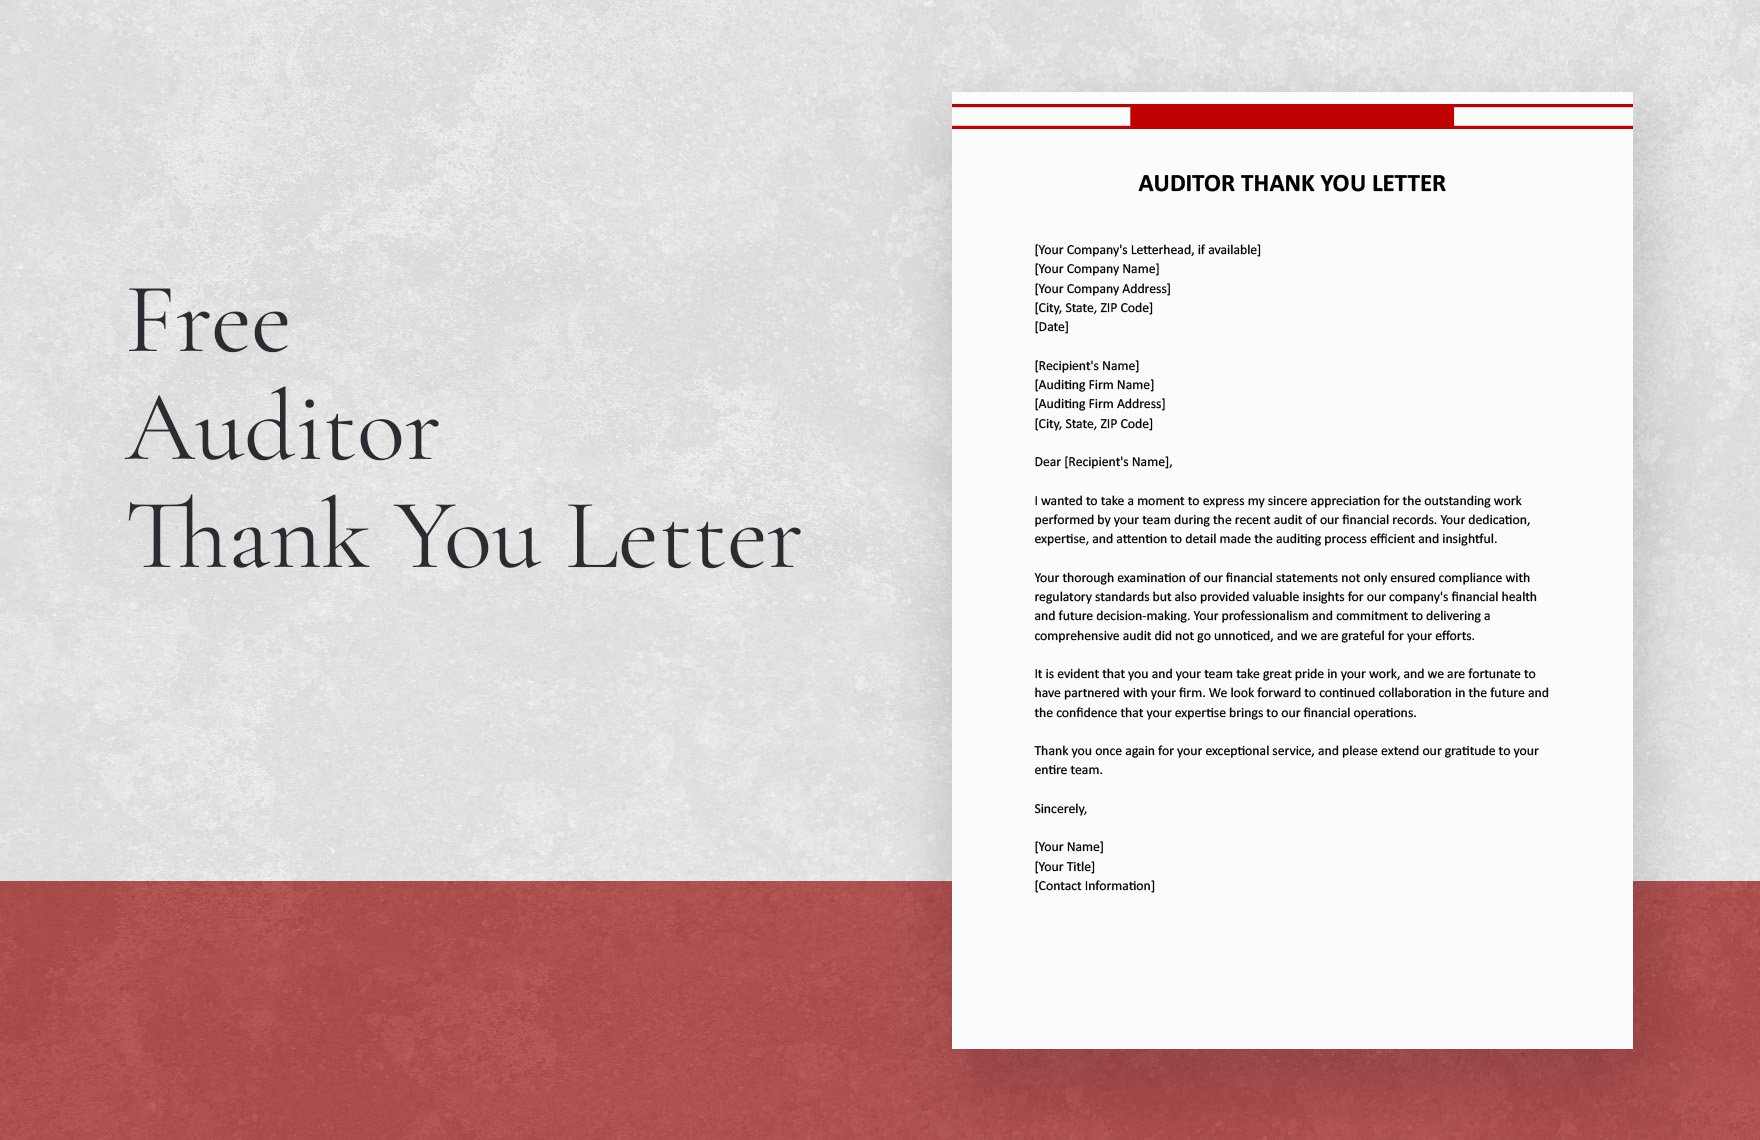 Auditor Thank You Letter